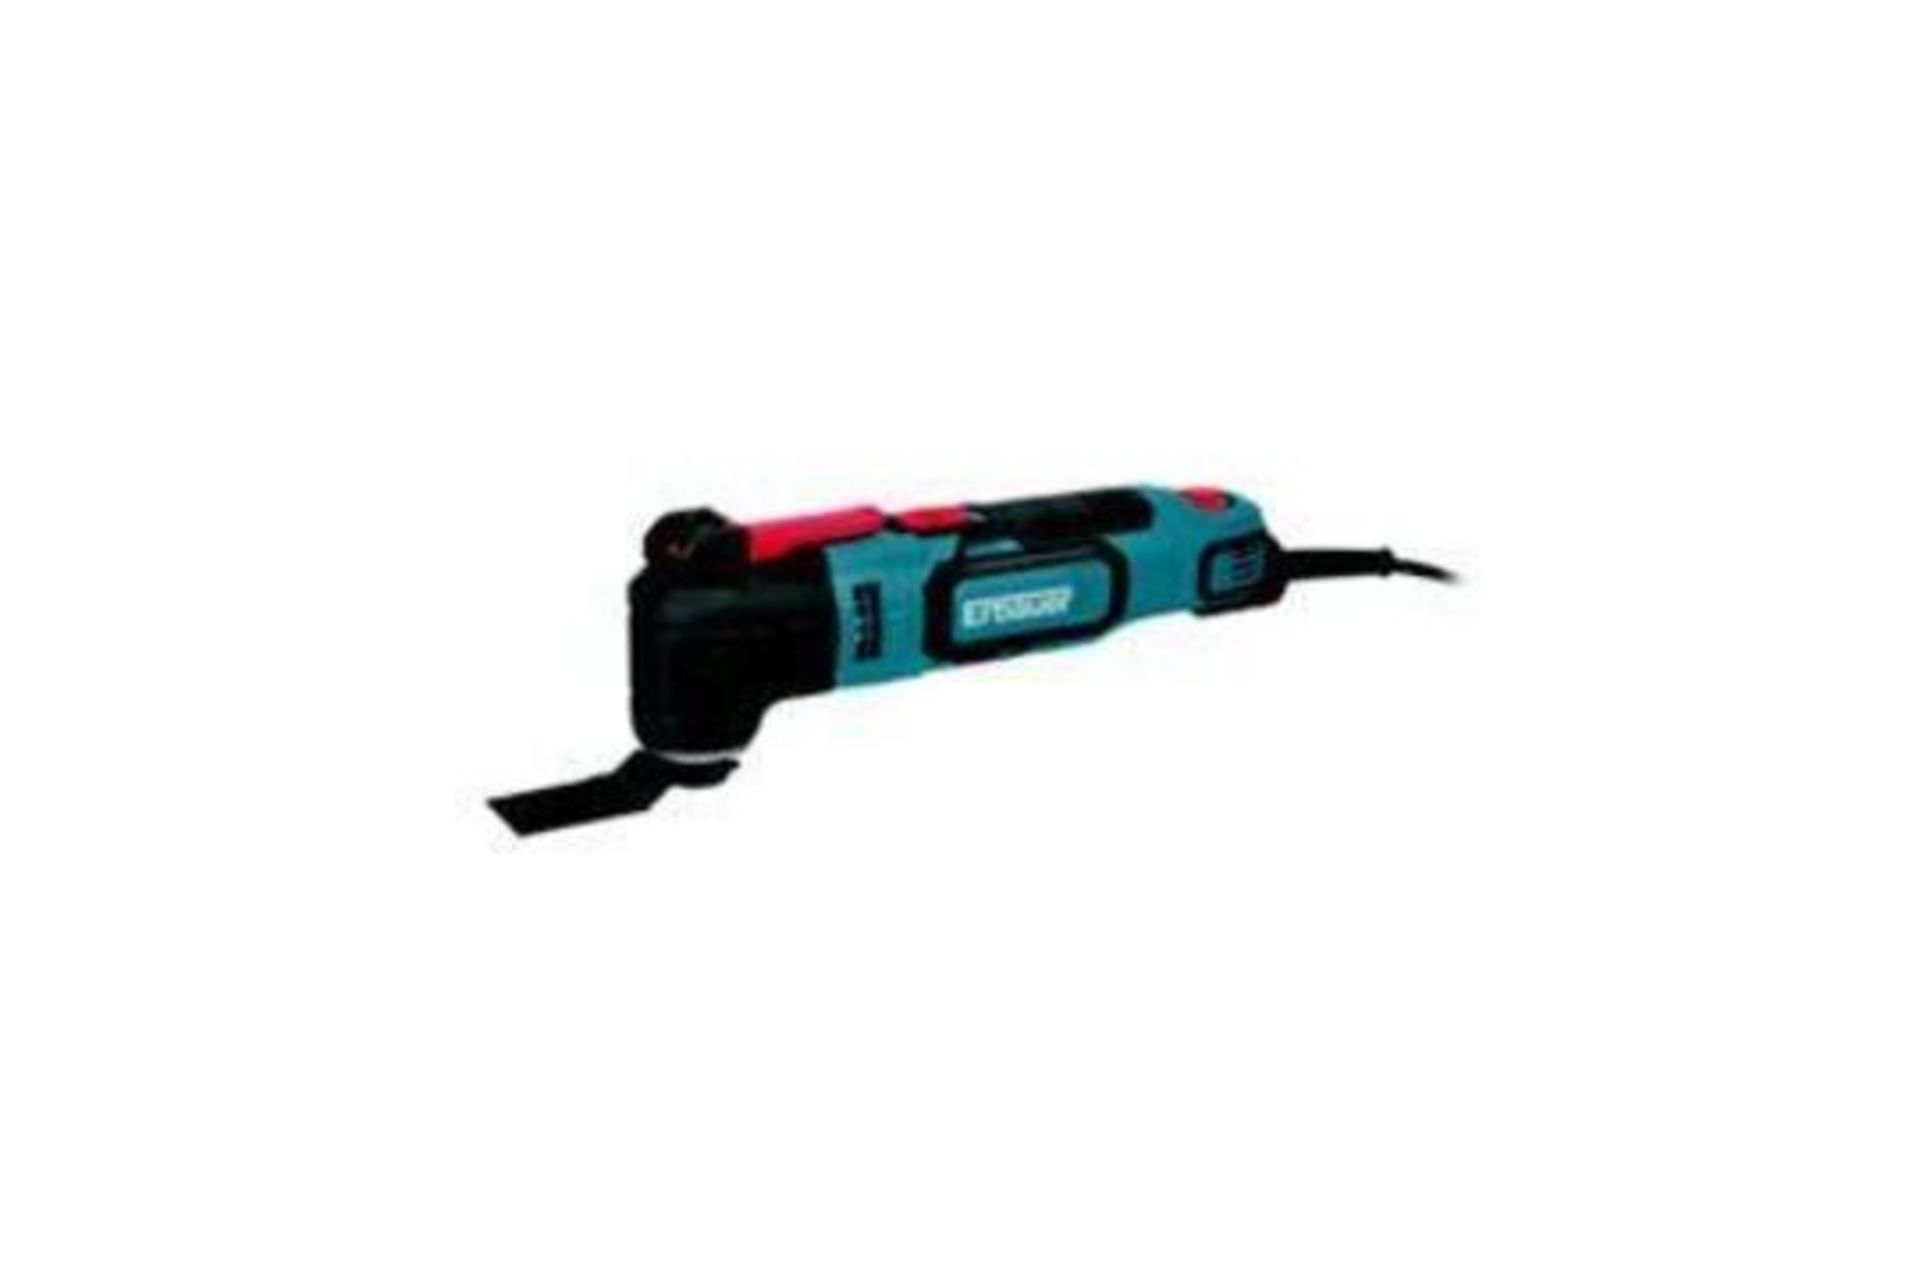 Erbauer 220-240V 300W Corded Multi Tool Emt300-Qc - R45. Erbauer build the power tools you can trust